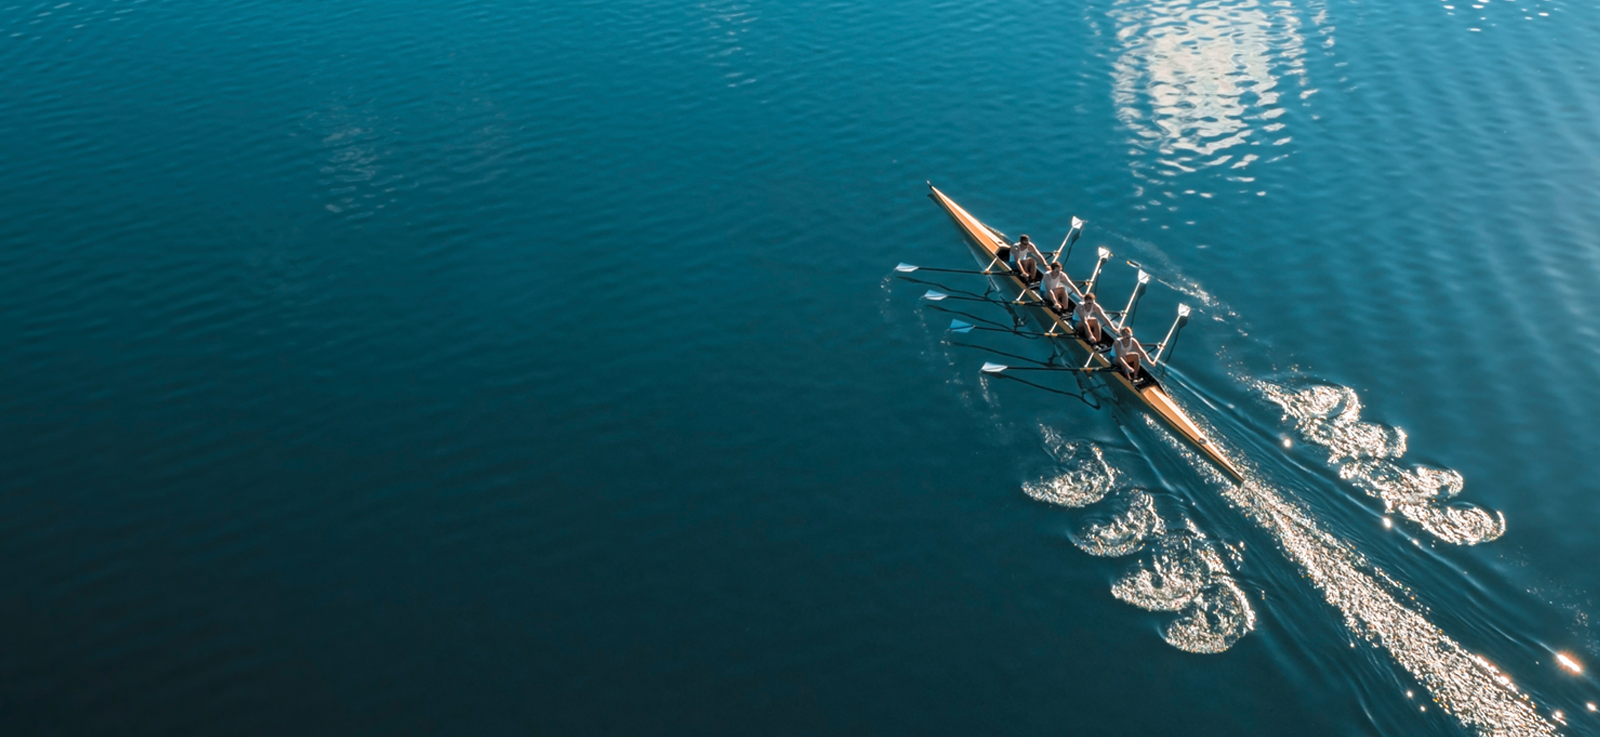 Image of clear blue water and a rowing team paddling in sync